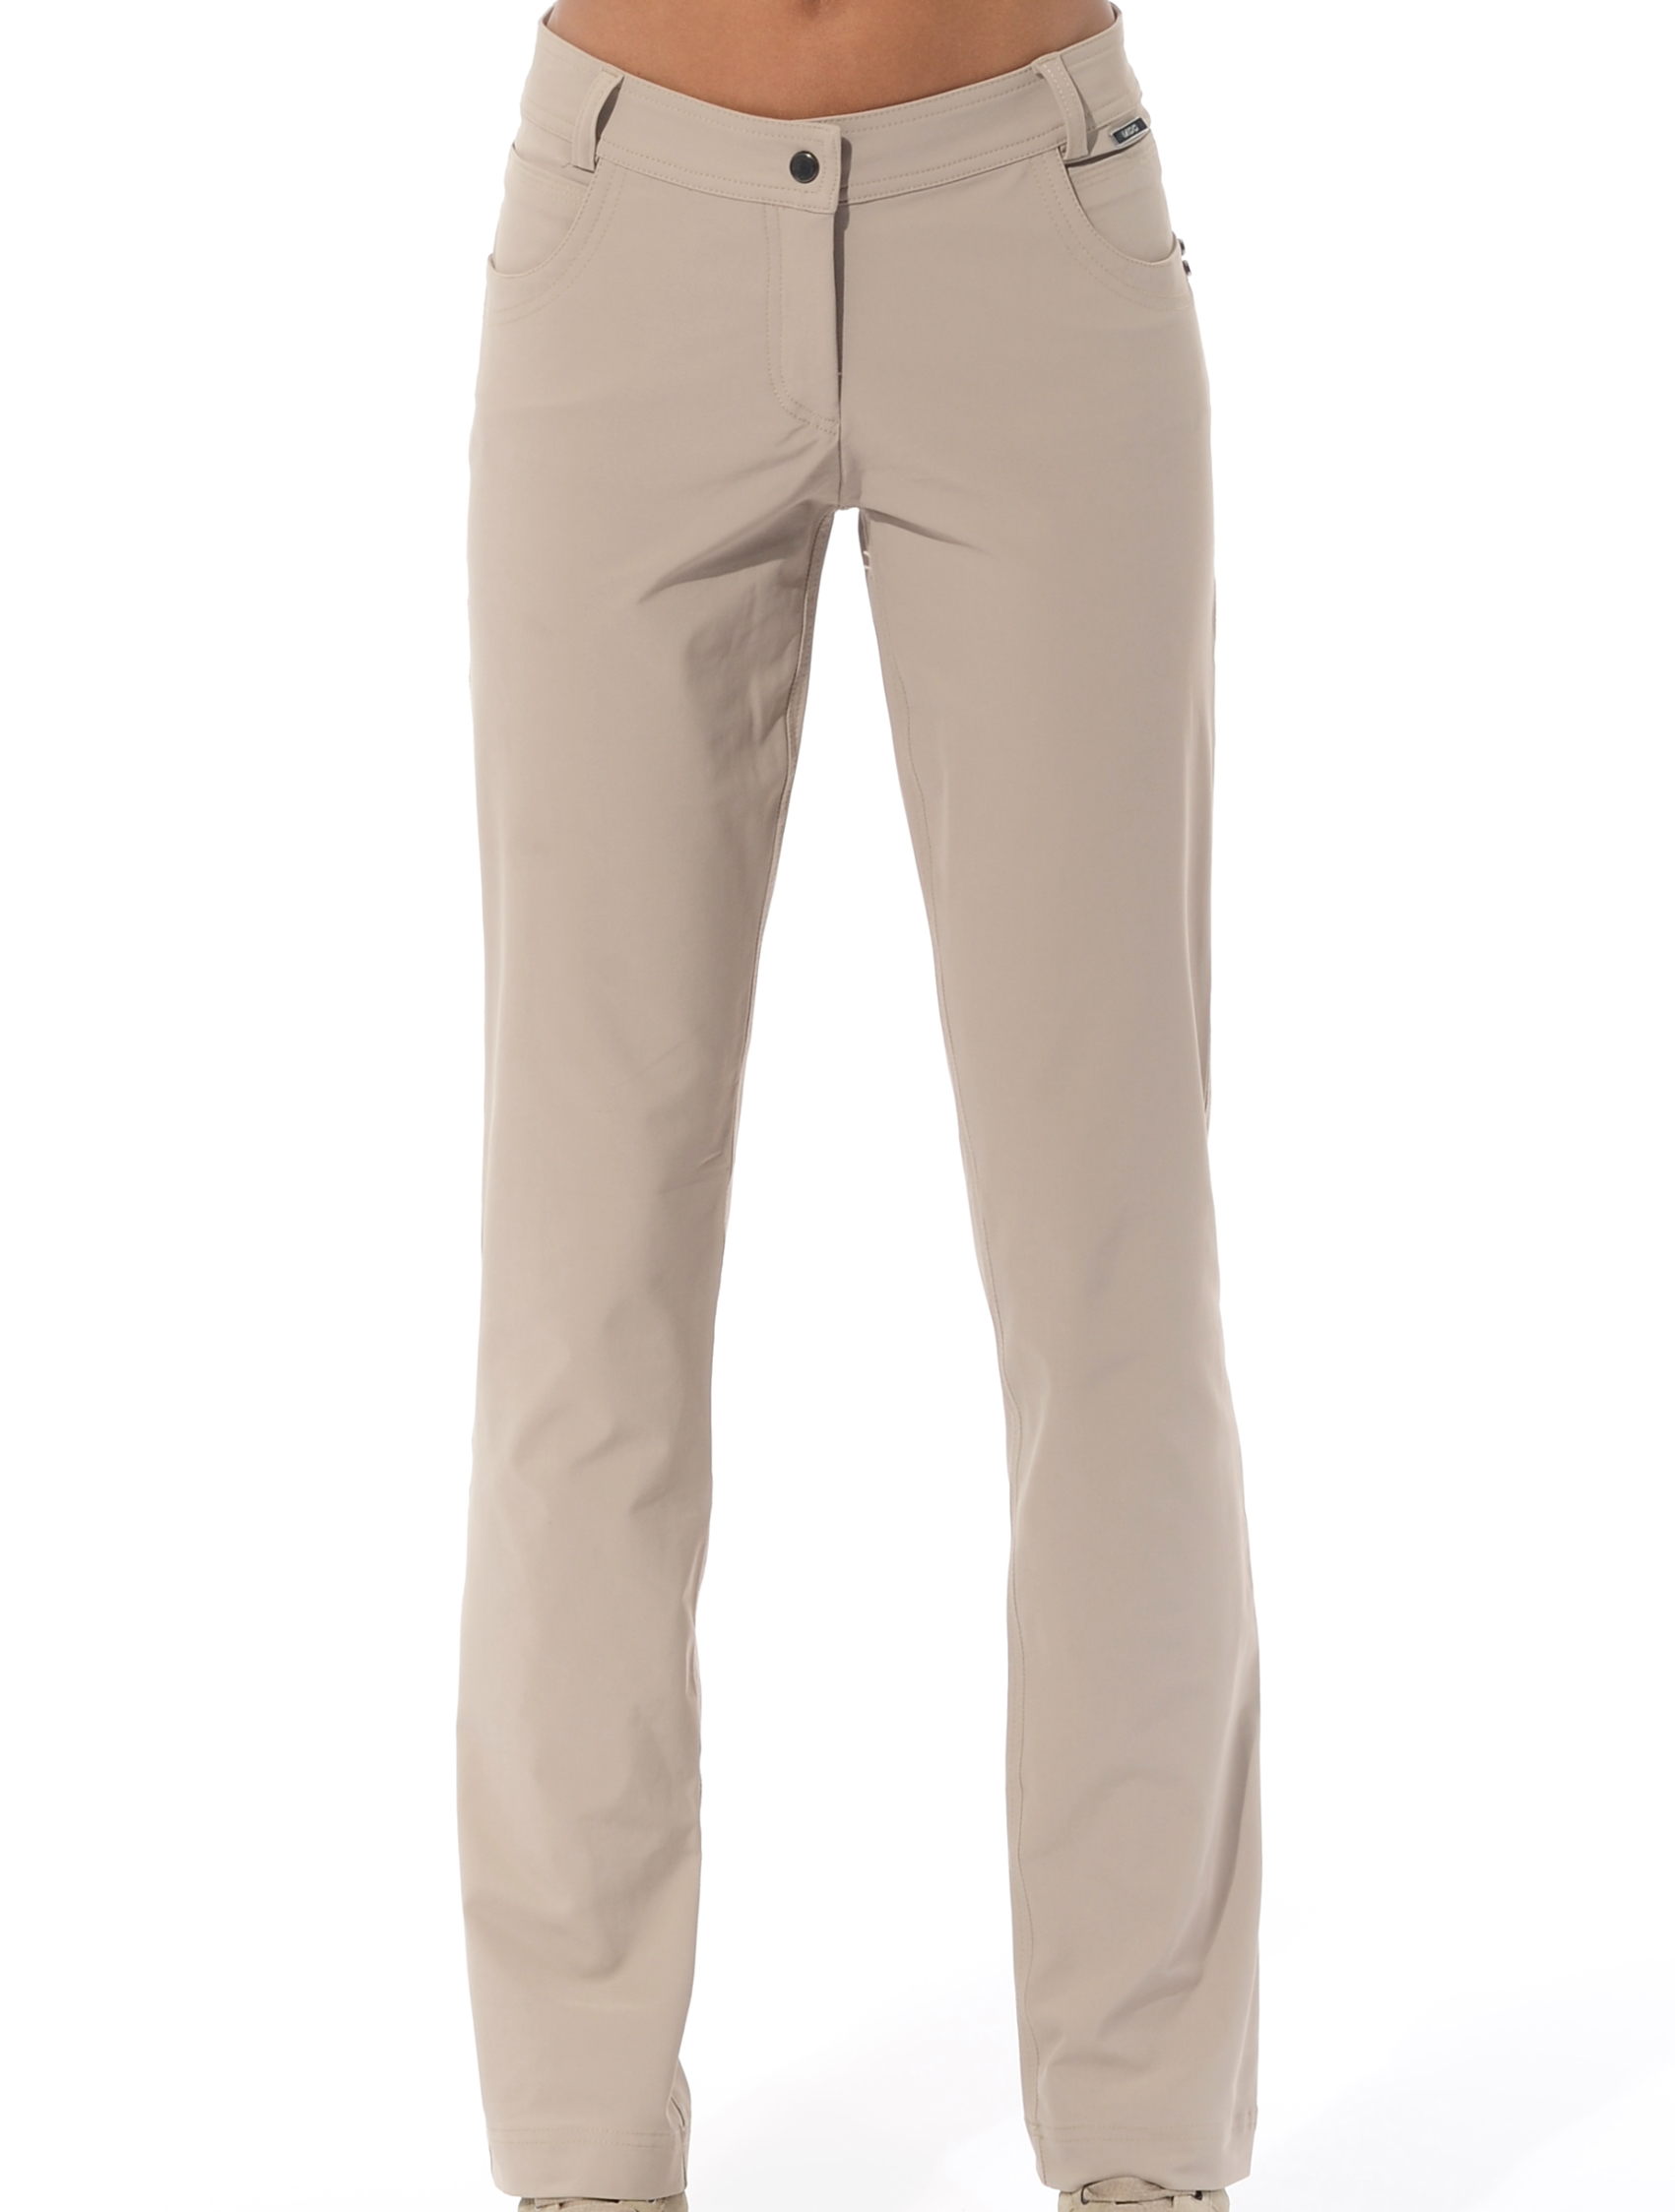 4way stretch straight cut pants taupe 